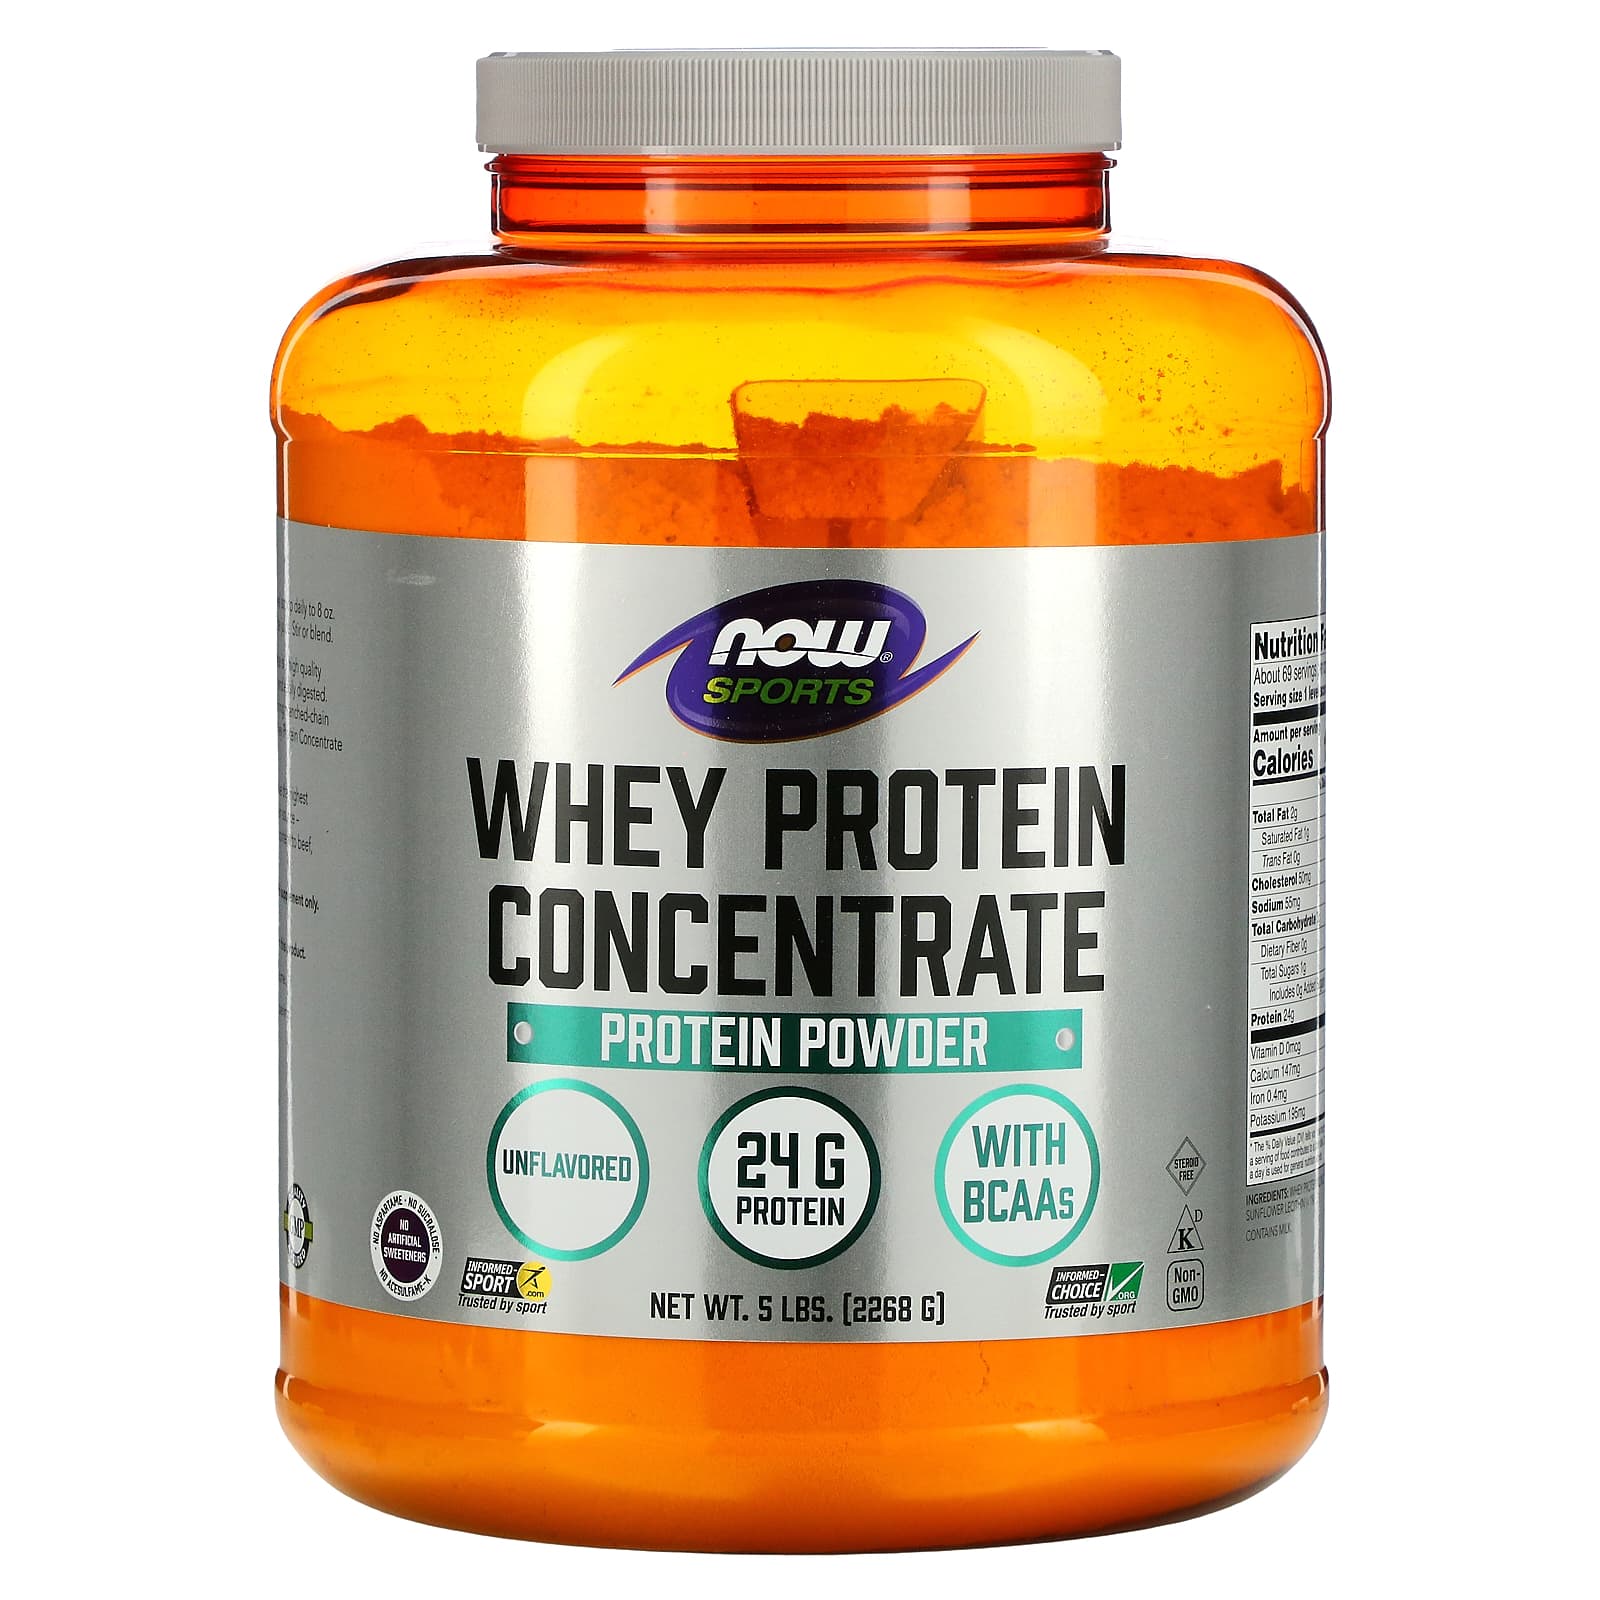 NOW Foods, Sports, Whey Protein Concentrate Protein Powder, Unflavored, 5 lbs (2268